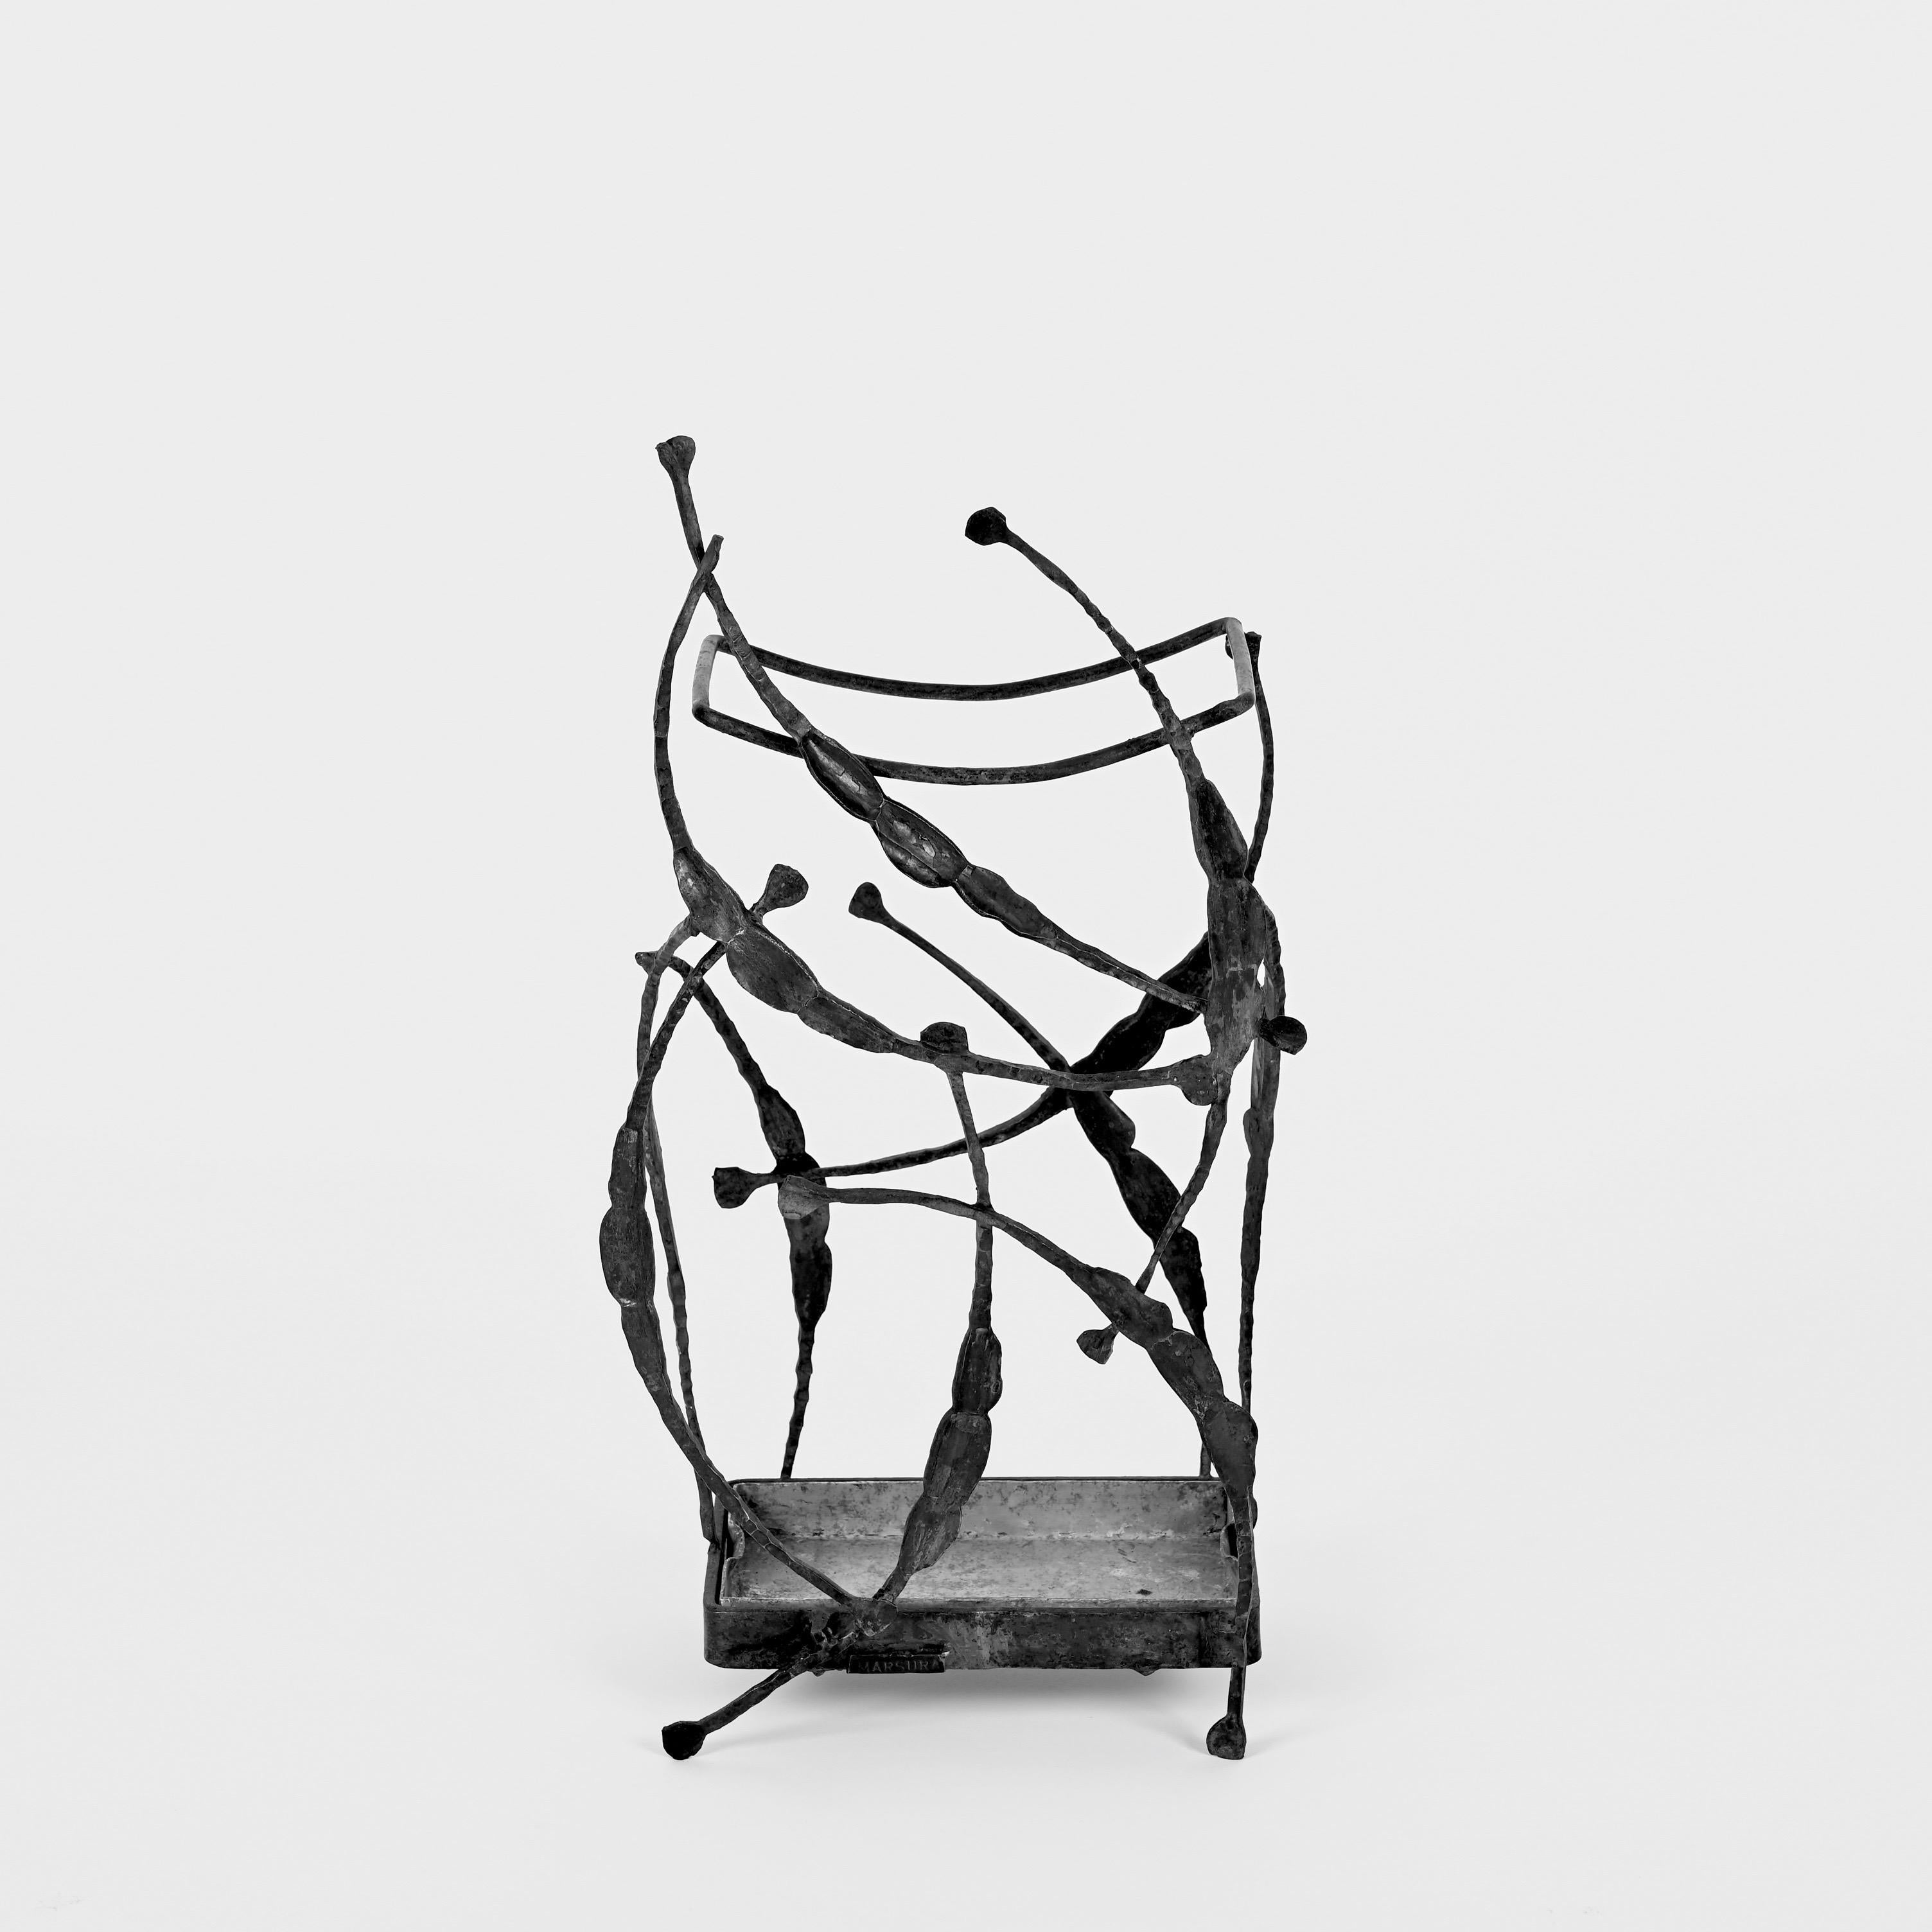 Fantastic midcentury brutalist hand-wrought-iron umbrella stand. Salvino Marsura designed this fantastic piece during the 1960s in Italy.

This item is a one-of-a-kind sculptural umbrella stand as it has been designed and handmade in wrought iron by